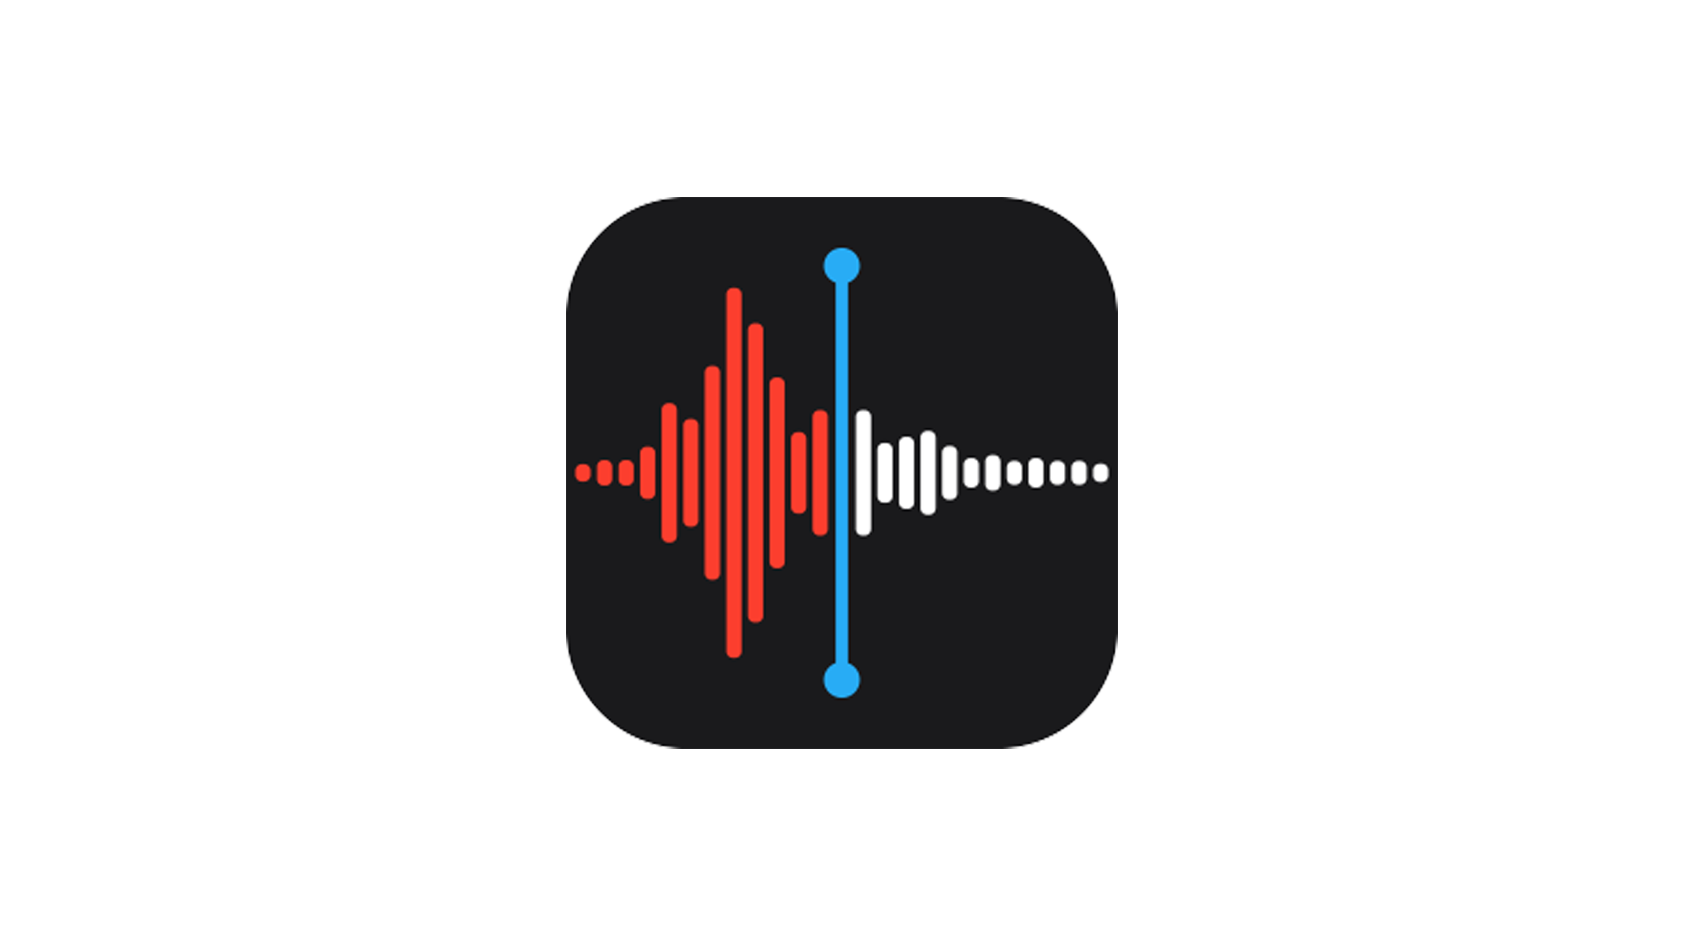 The Apple Voice Memos icon against a white background.